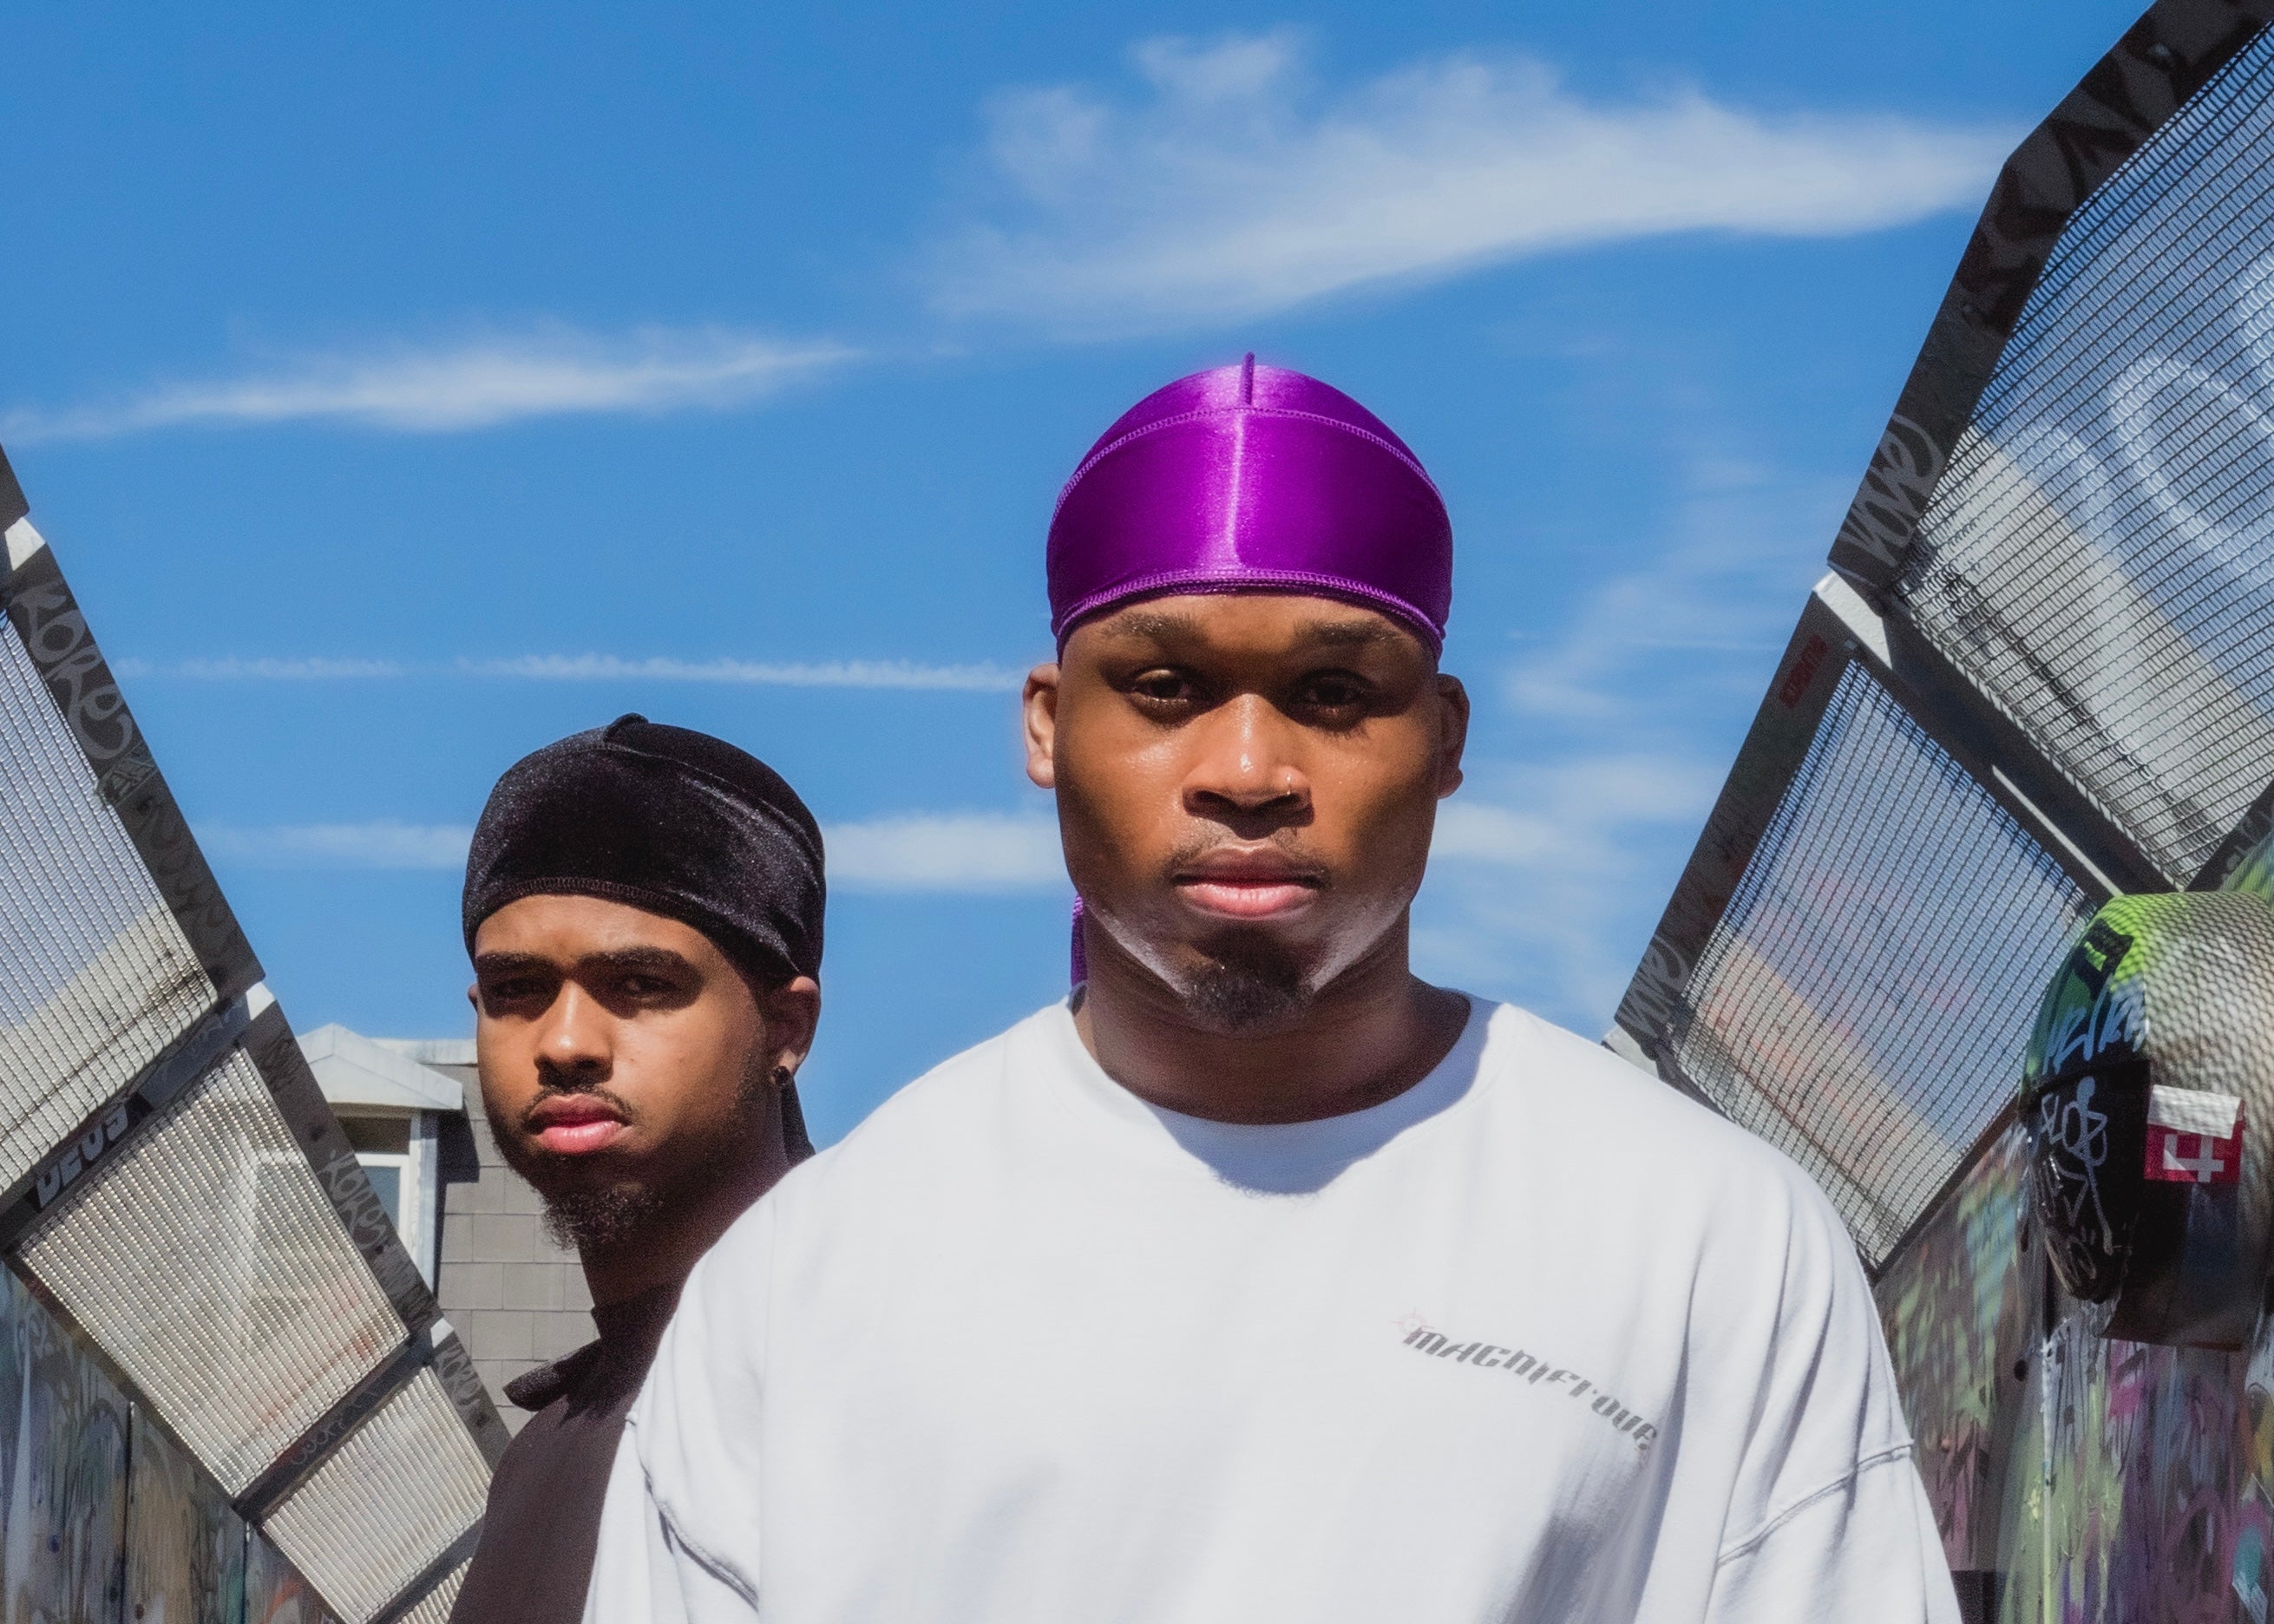 Great Vibes Silky Durags In 3 Colors